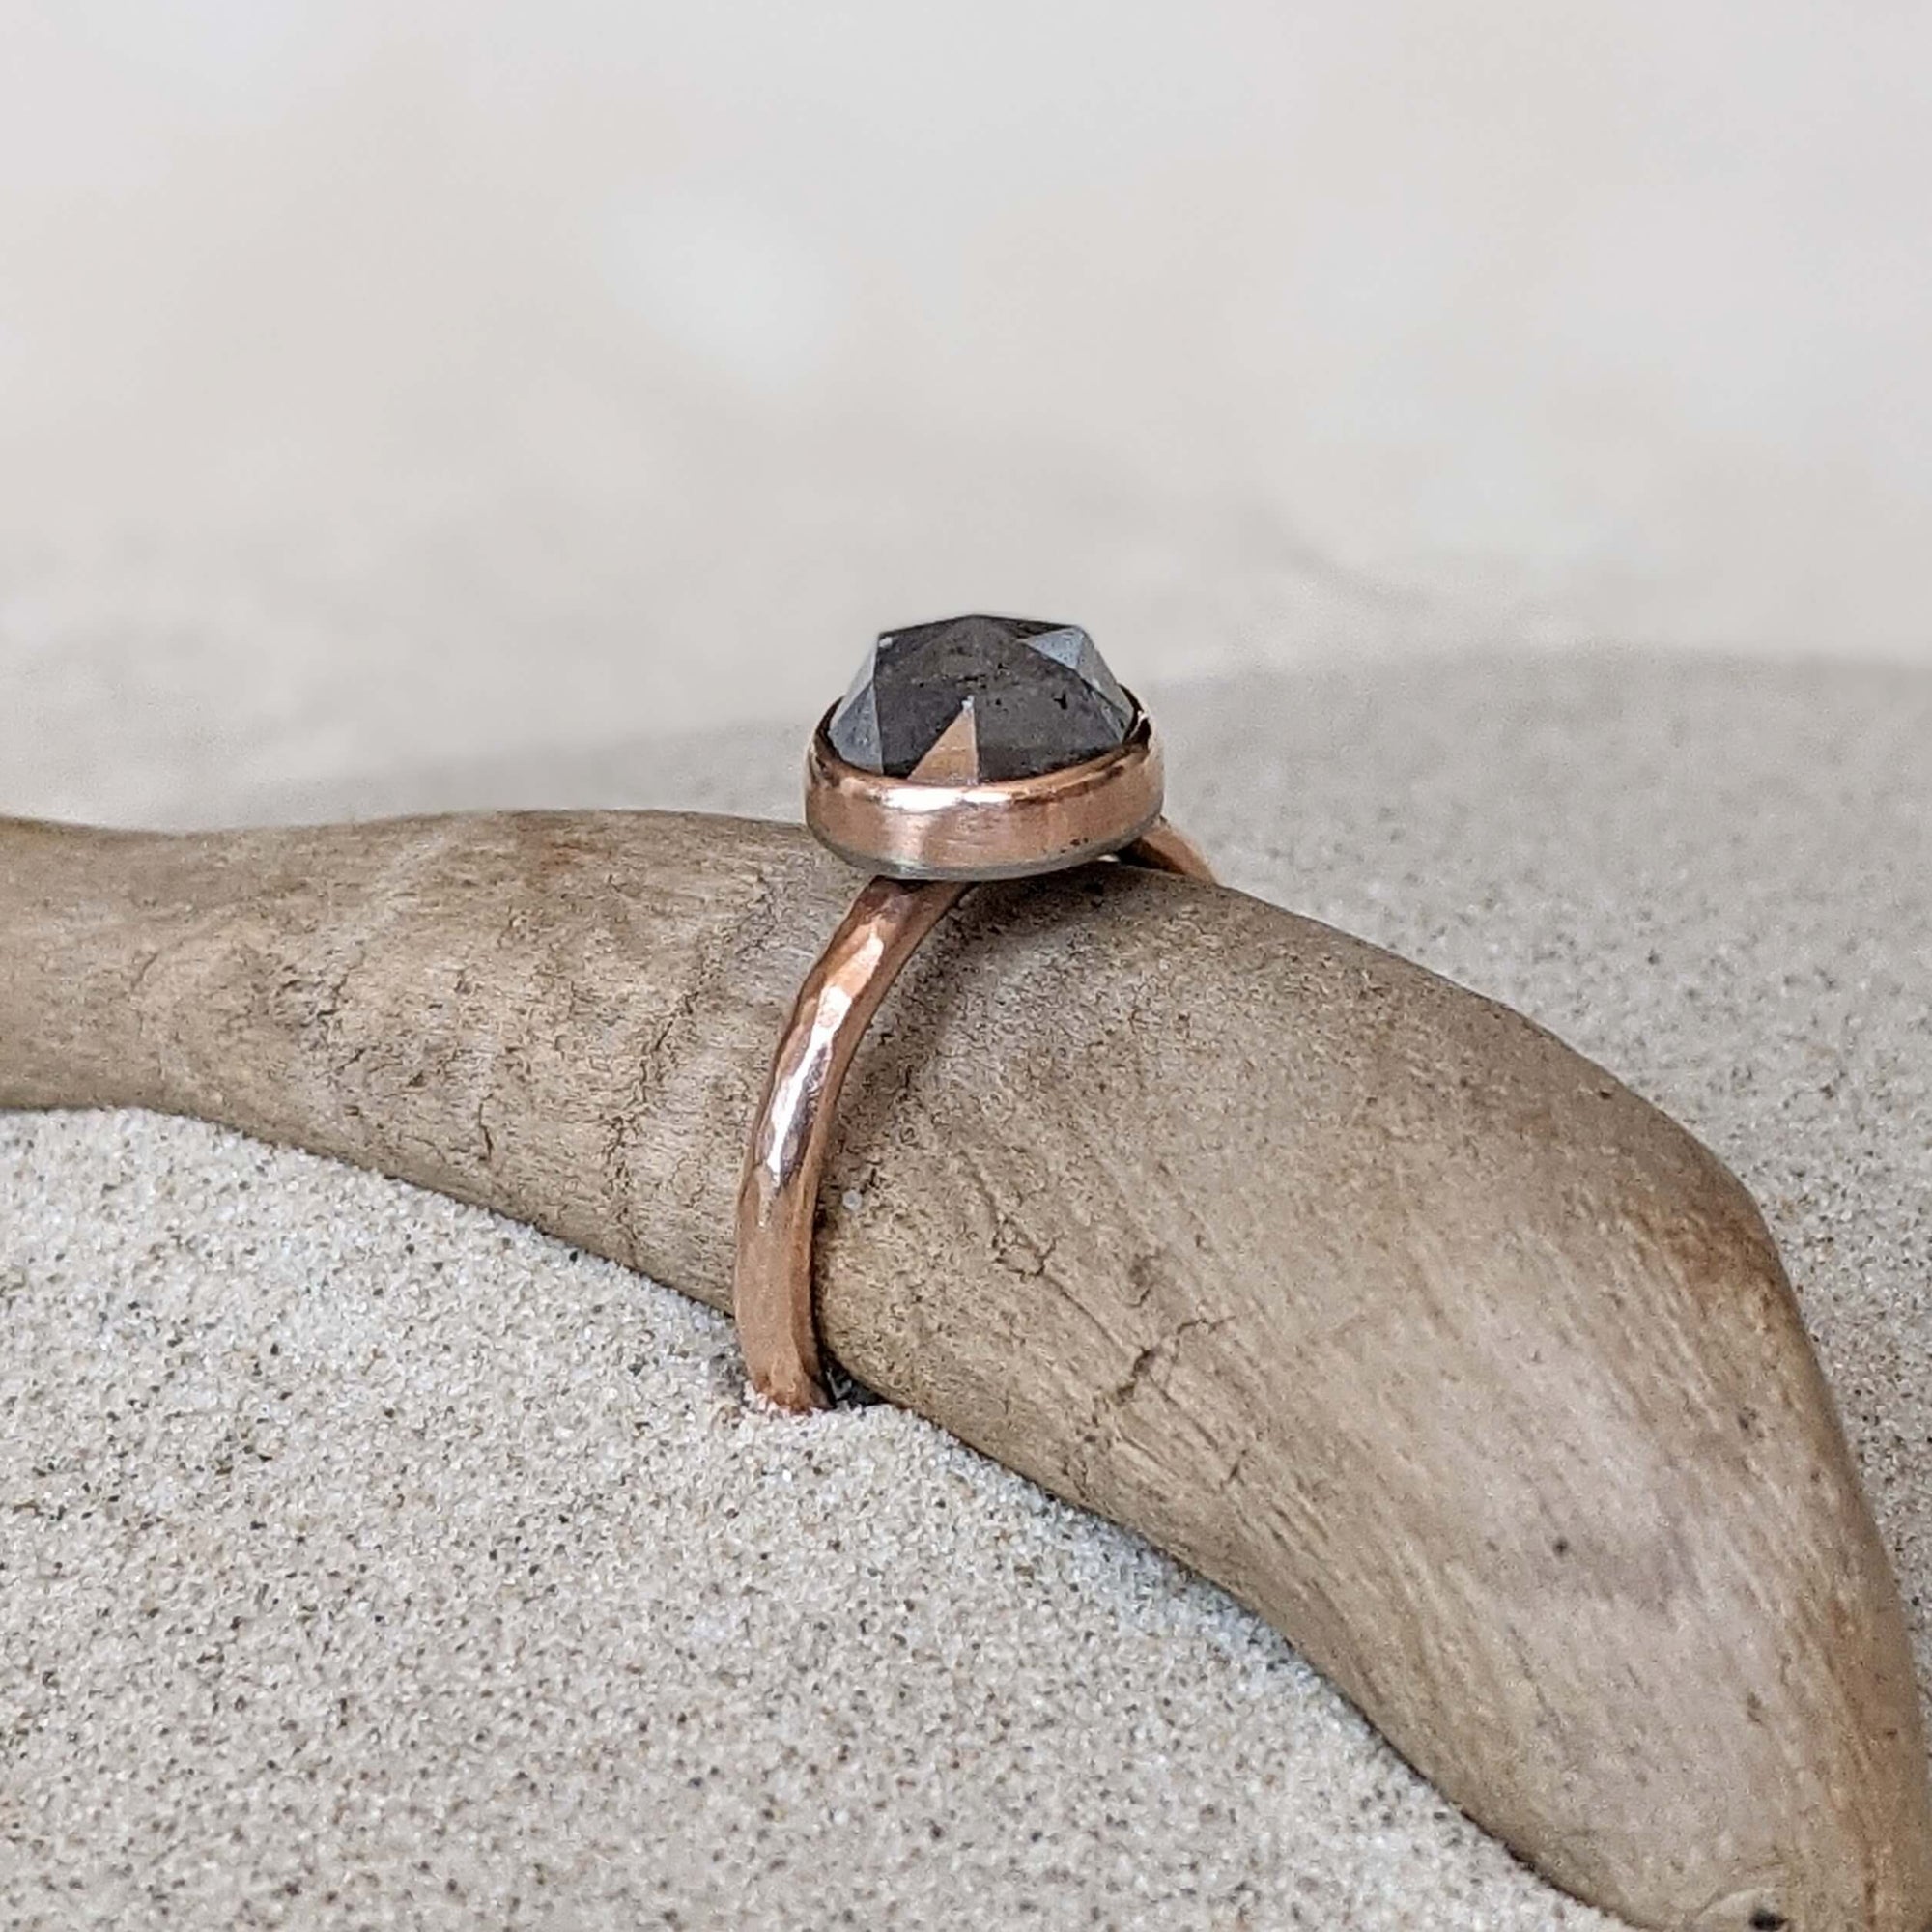 Gray diamond engagement ring set in red gold. Handmade with recycled metal and conflict-free stone. Ethically crafted by EC Design Jewelry in Minneapolis, MN.